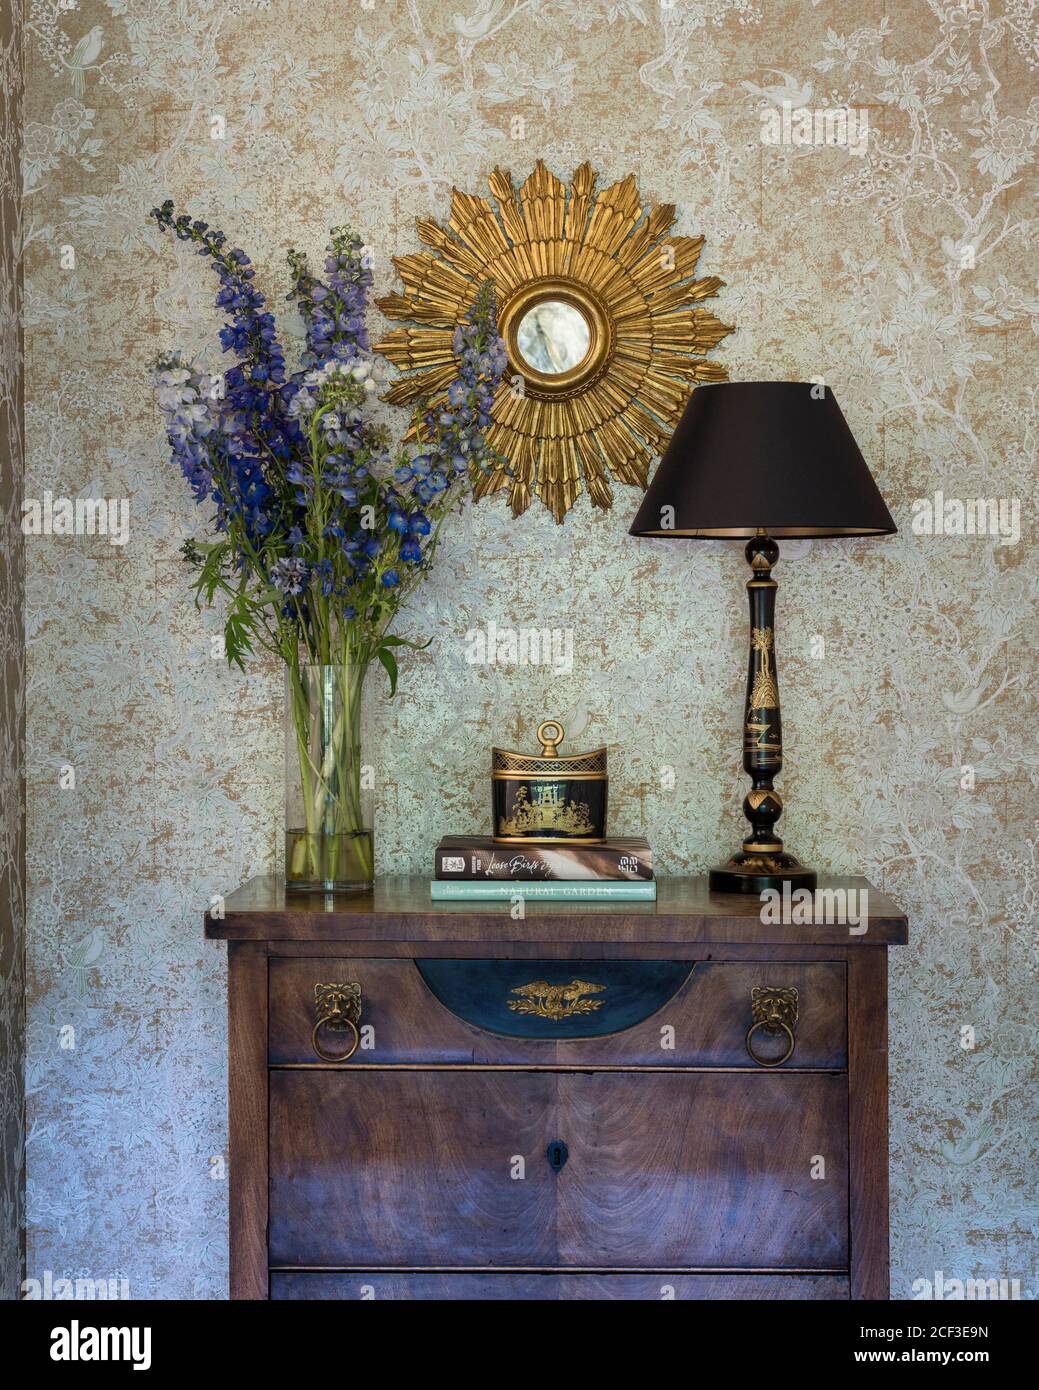 Flowers and lamp on wooden drawers below mirror Stock Photo